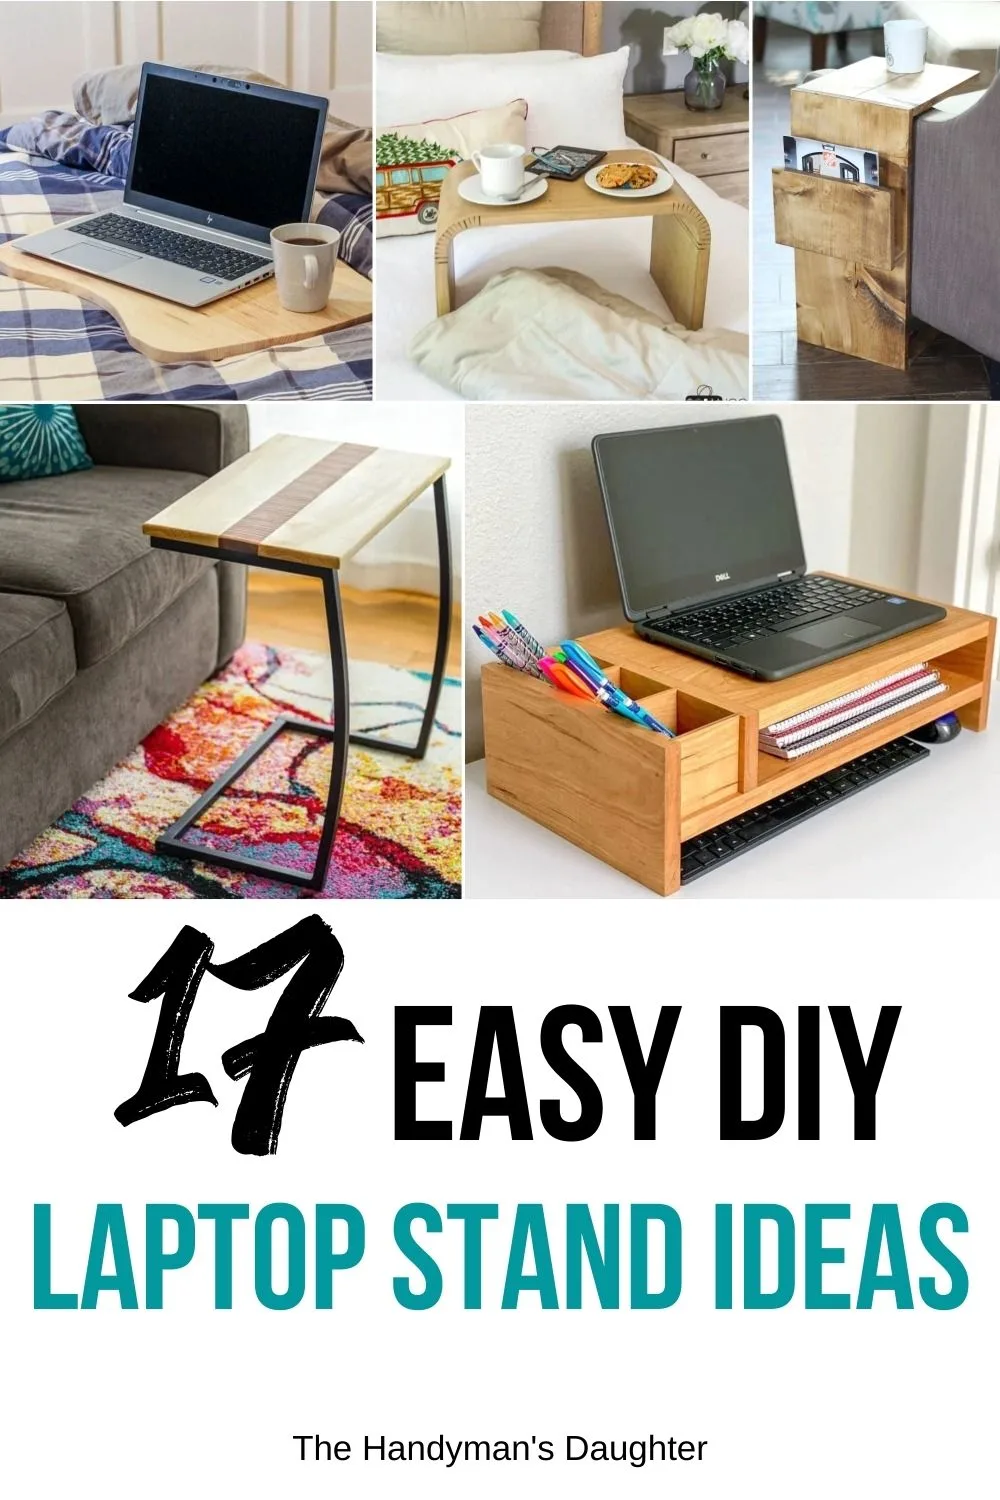 17 Smart Simple Diy Laptop Stand Ideas The Handyman S Daughter